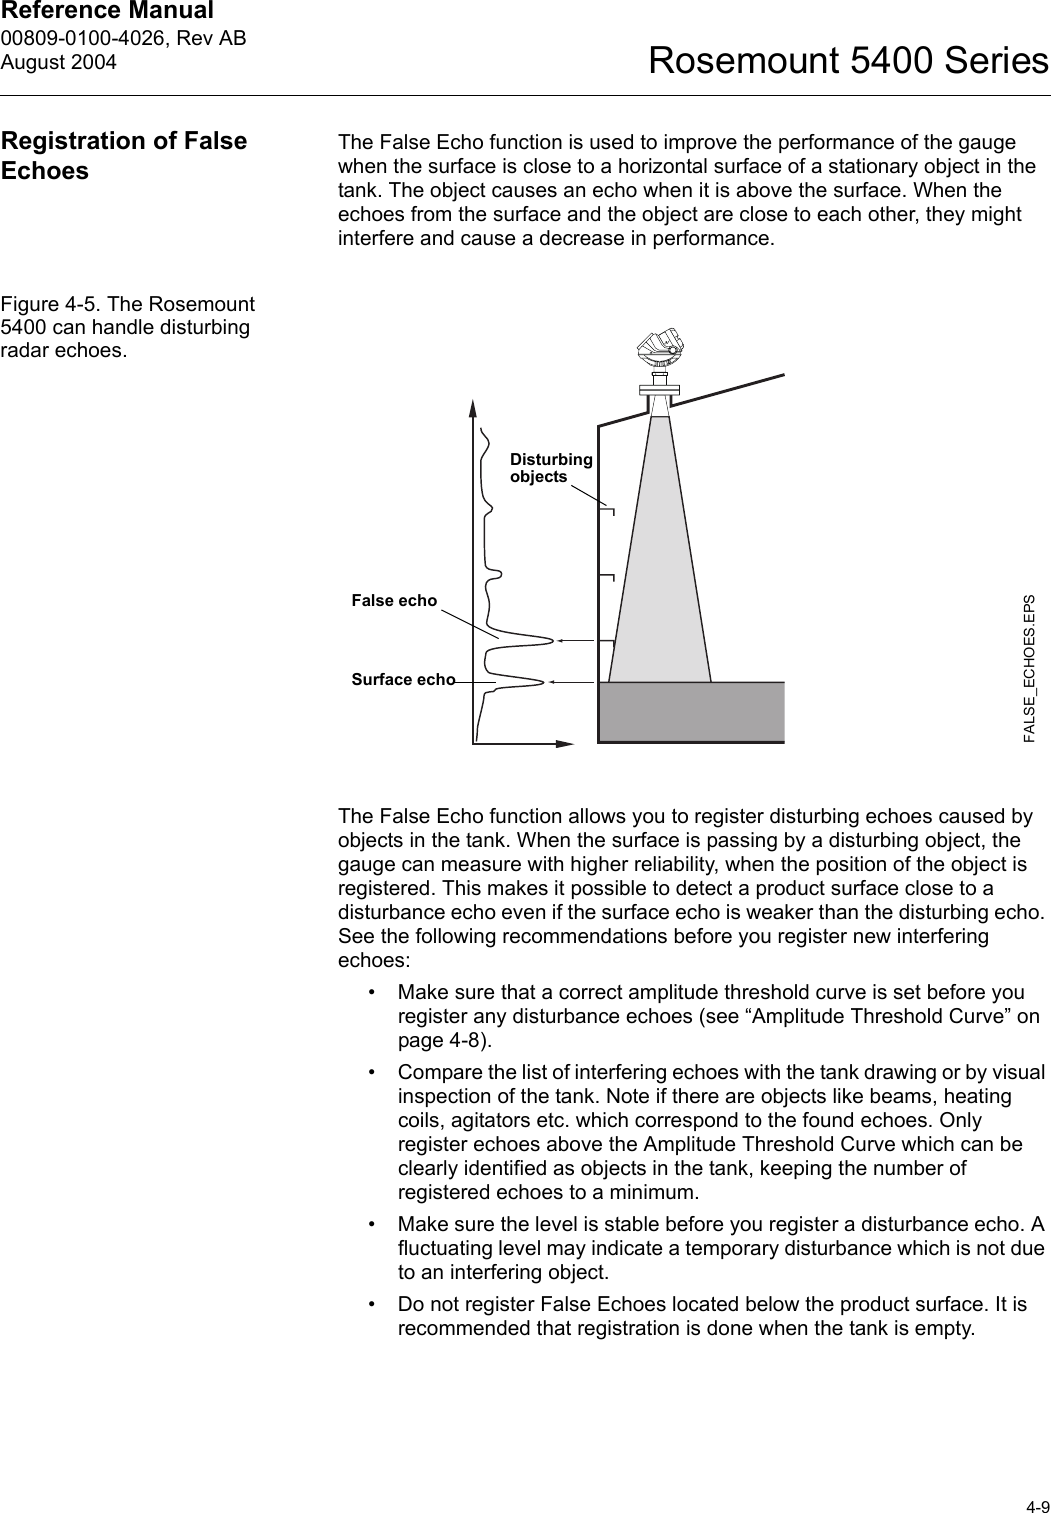 Reference Manual 00809-0100-4026, Rev ABAugust 20044-9Rosemount 5400 SeriesRegistration of False EchoesThe False Echo function is used to improve the performance of the gauge when the surface is close to a horizontal surface of a stationary object in the tank. The object causes an echo when it is above the surface. When the echoes from the surface and the object are close to each other, they might interfere and cause a decrease in performance.Figure 4-5. The Rosemount 5400 can handle disturbing radar echoes.The False Echo function allows you to register disturbing echoes caused by objects in the tank. When the surface is passing by a disturbing object, the gauge can measure with higher reliability, when the position of the object is registered. This makes it possible to detect a product surface close to a disturbance echo even if the surface echo is weaker than the disturbing echo. See the following recommendations before you register new interfering echoes:• Make sure that a correct amplitude threshold curve is set before you register any disturbance echoes (see “Amplitude Threshold Curve” on page 4-8).• Compare the list of interfering echoes with the tank drawing or by visual inspection of the tank. Note if there are objects like beams, heating coils, agitators etc. which correspond to the found echoes. Only register echoes above the Amplitude Threshold Curve which can be clearly identified as objects in the tank, keeping the number of registered echoes to a minimum.• Make sure the level is stable before you register a disturbance echo. A fluctuating level may indicate a temporary disturbance which is not due to an interfering object.• Do not register False Echoes located below the product surface. It is recommended that registration is done when the tank is empty.FALSE_ECHOES.EPSFalse echoSurface echoDisturbing objects